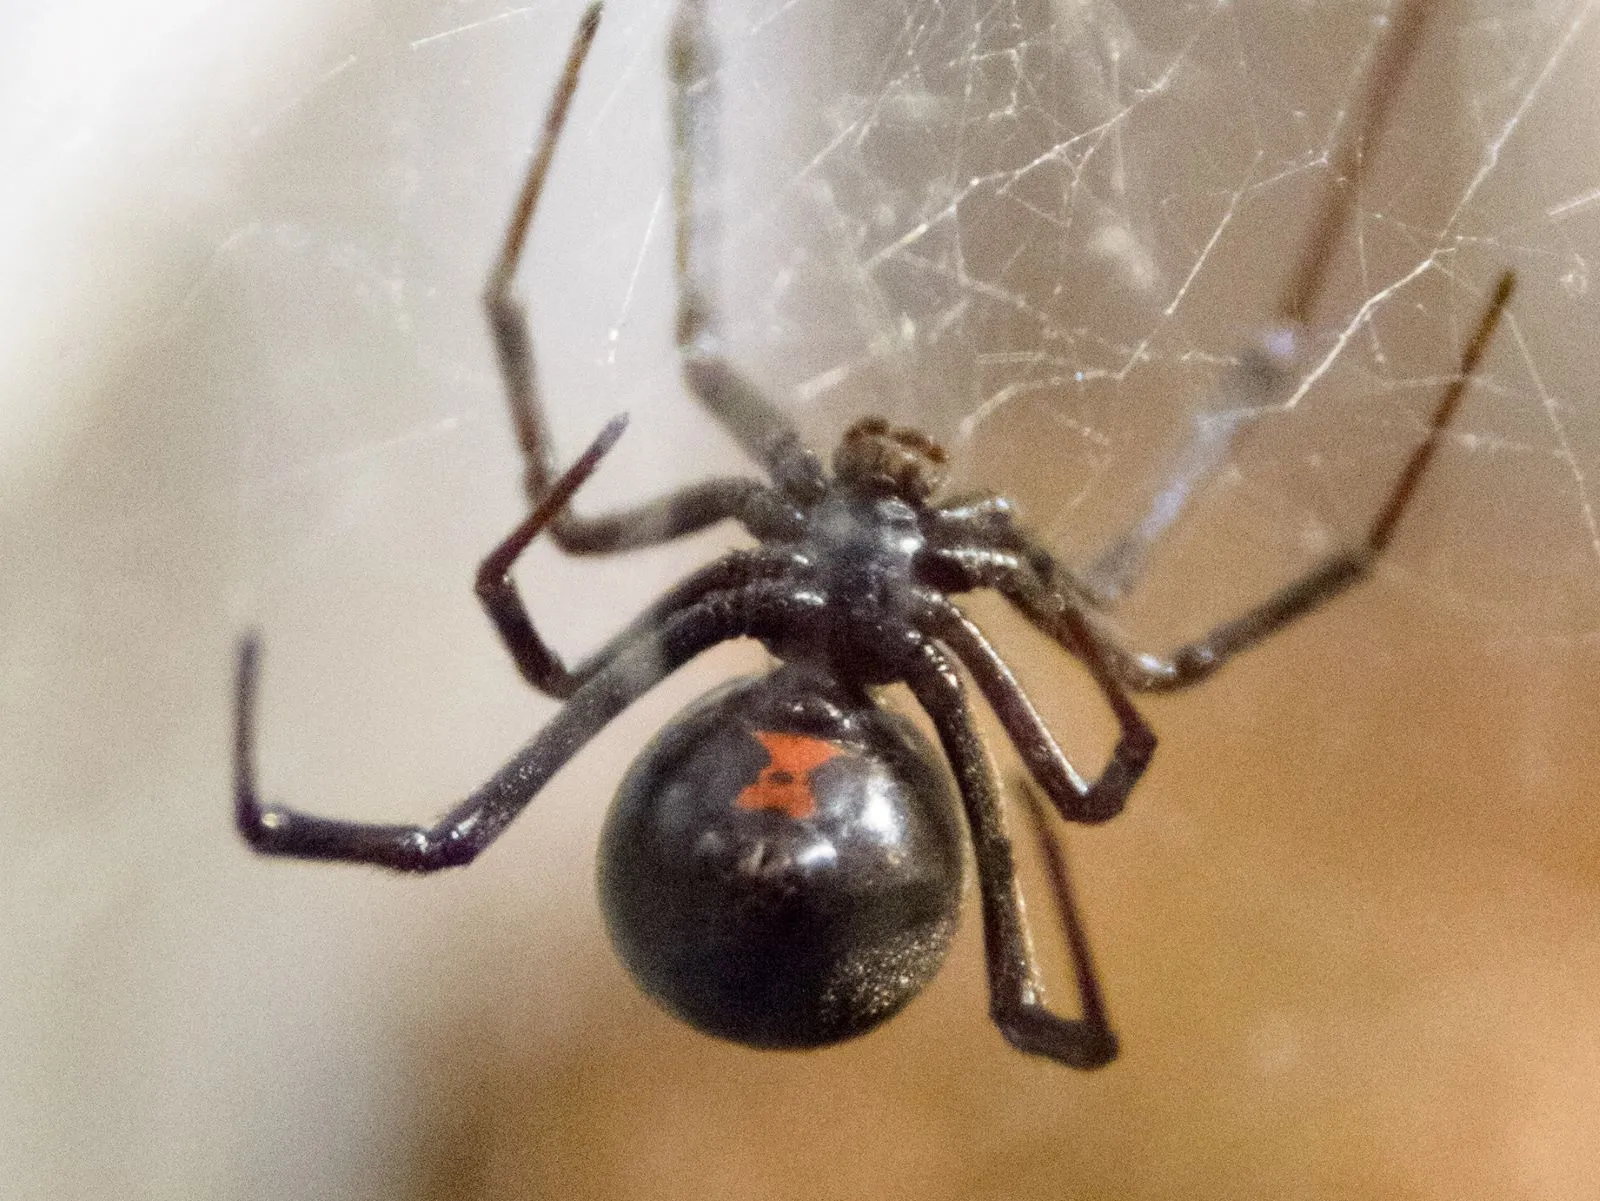 Eight Fun Facts About Black Widows